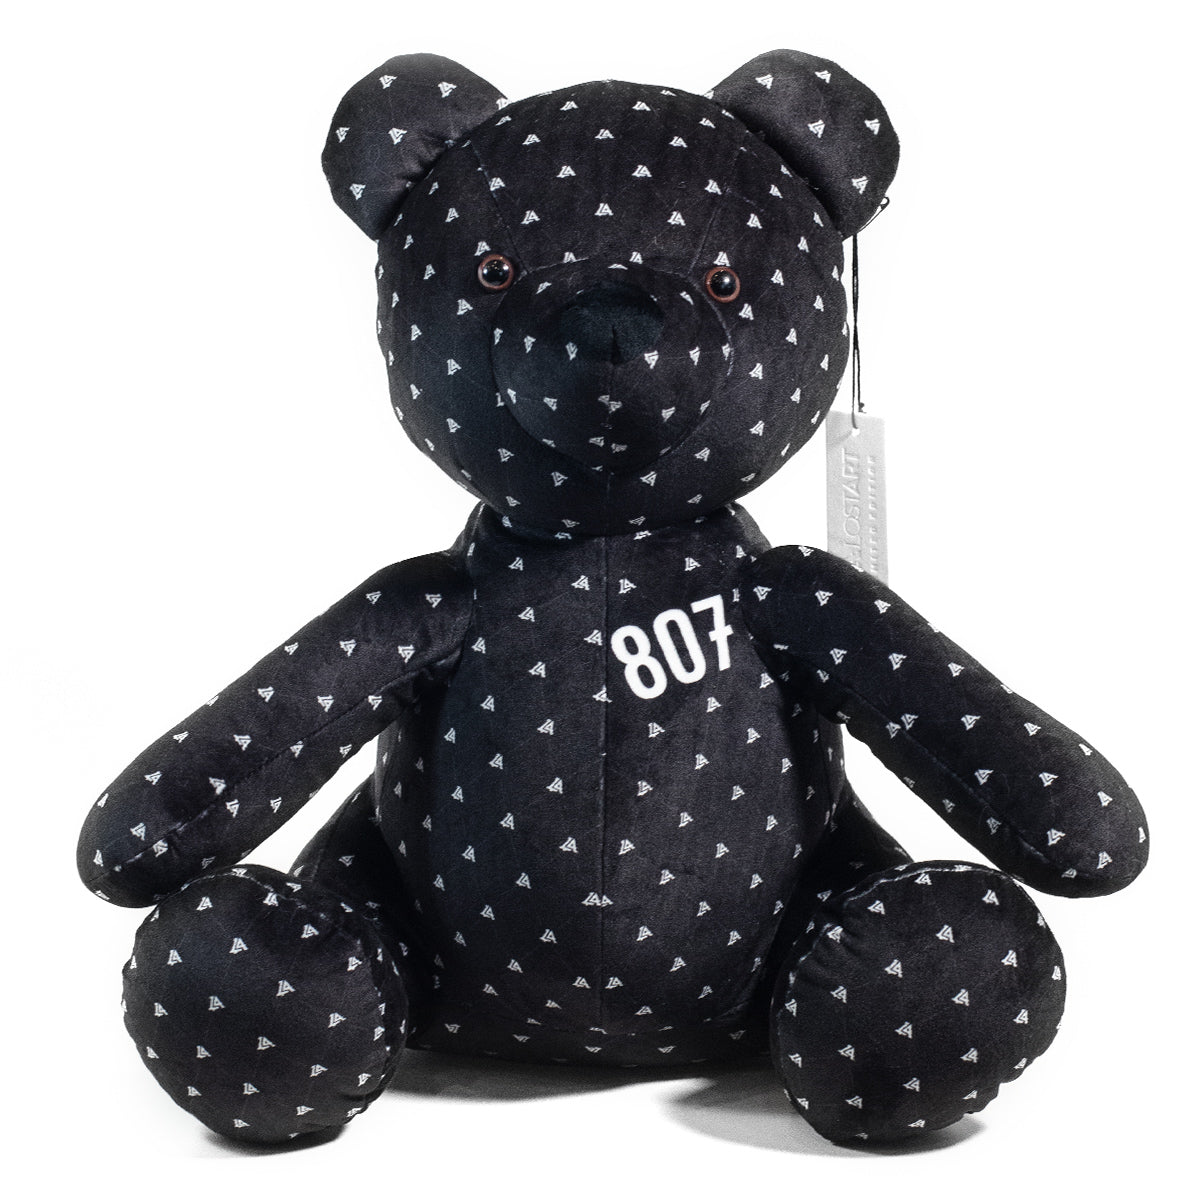 Lost Art Canada - black white patterned teddy bear front view